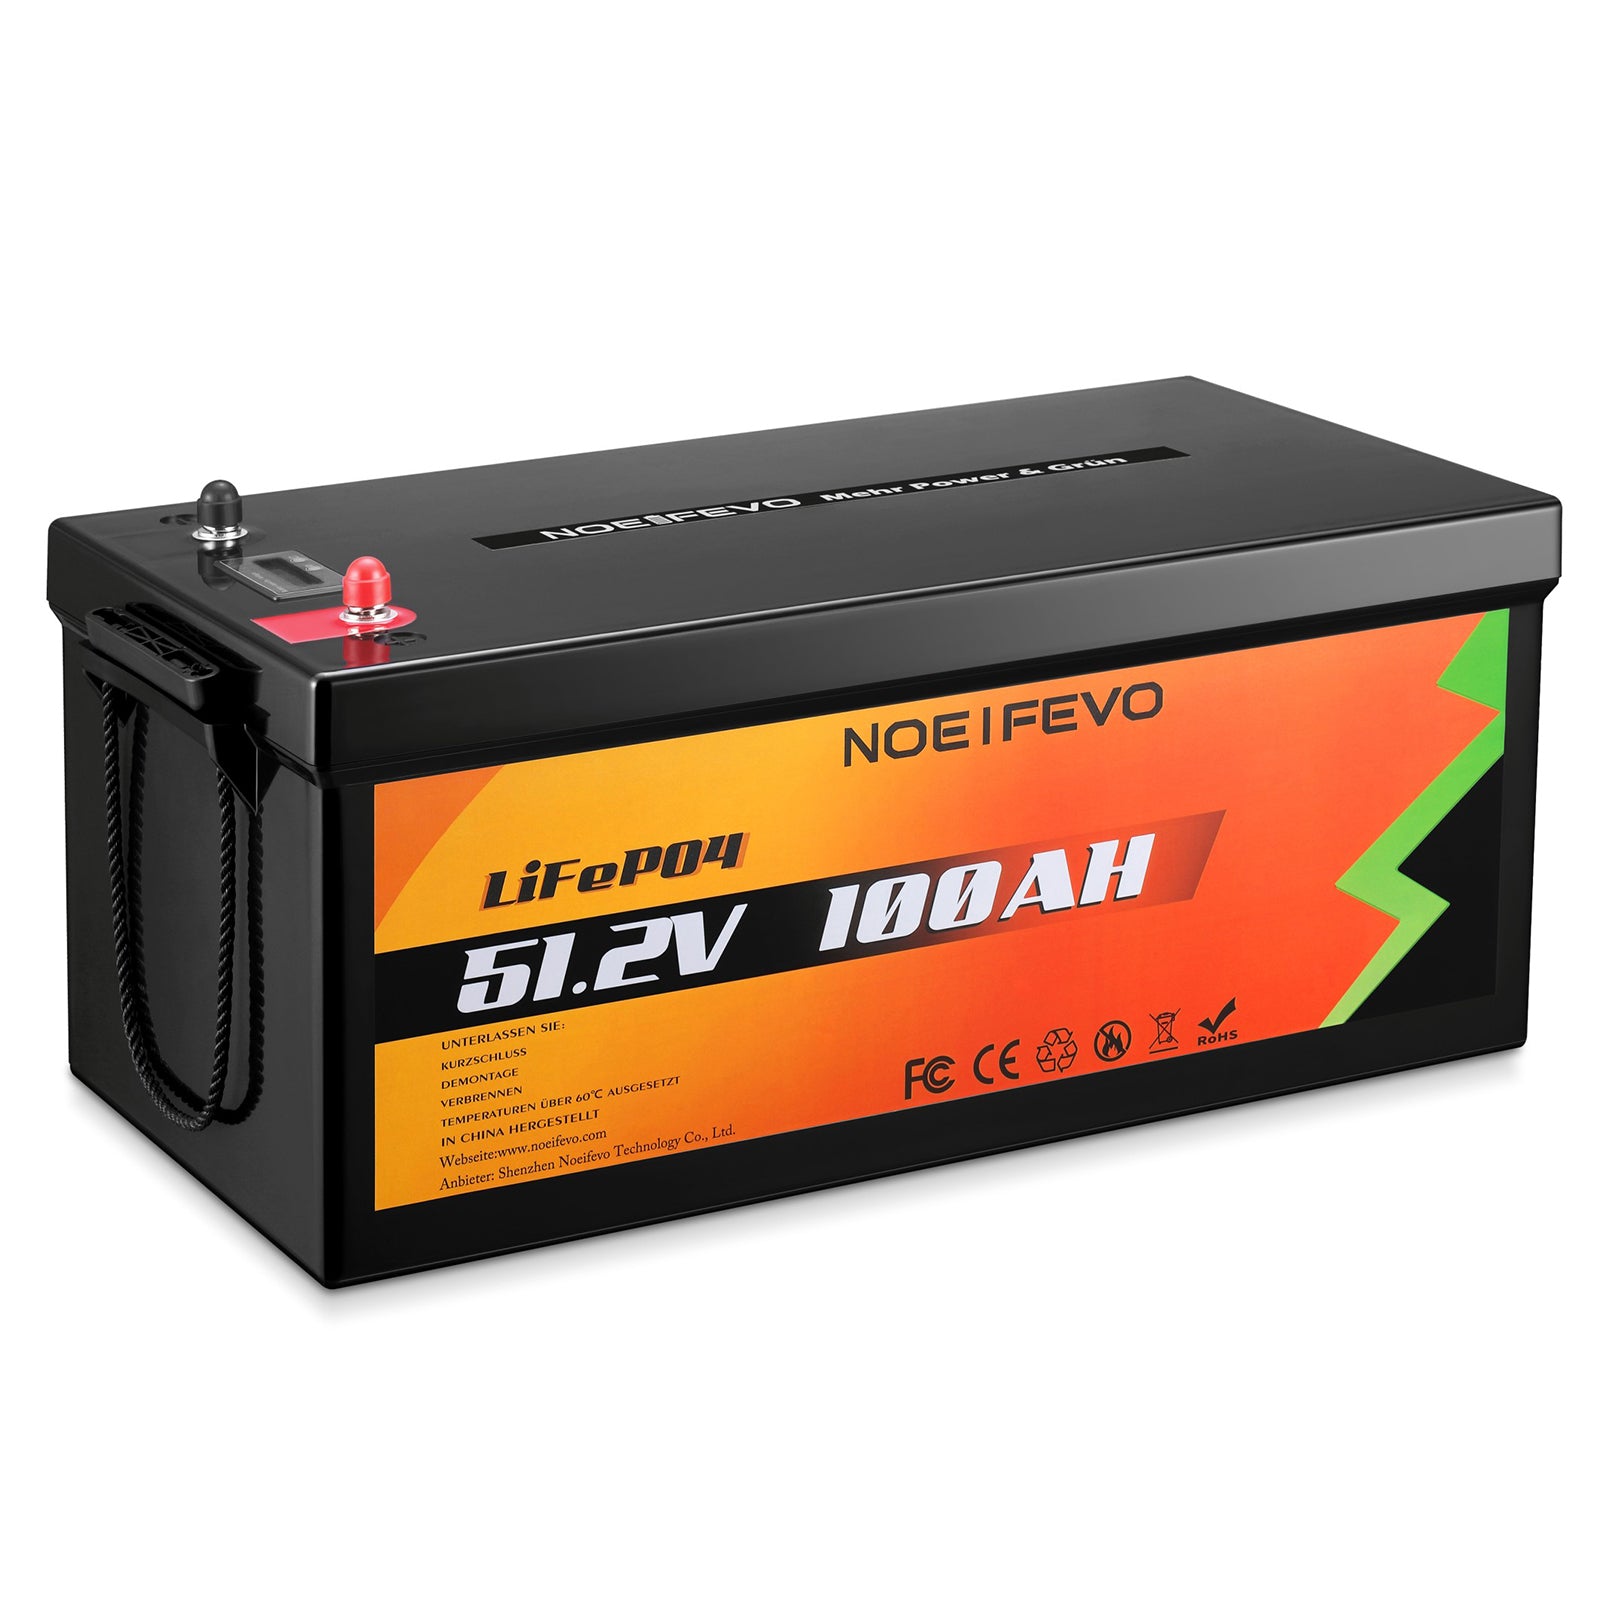 NOEIFEVO D48100 51.2V 100AH Lithium Iron Phosphate Battery LiFePO4 Battery With 100A BMS